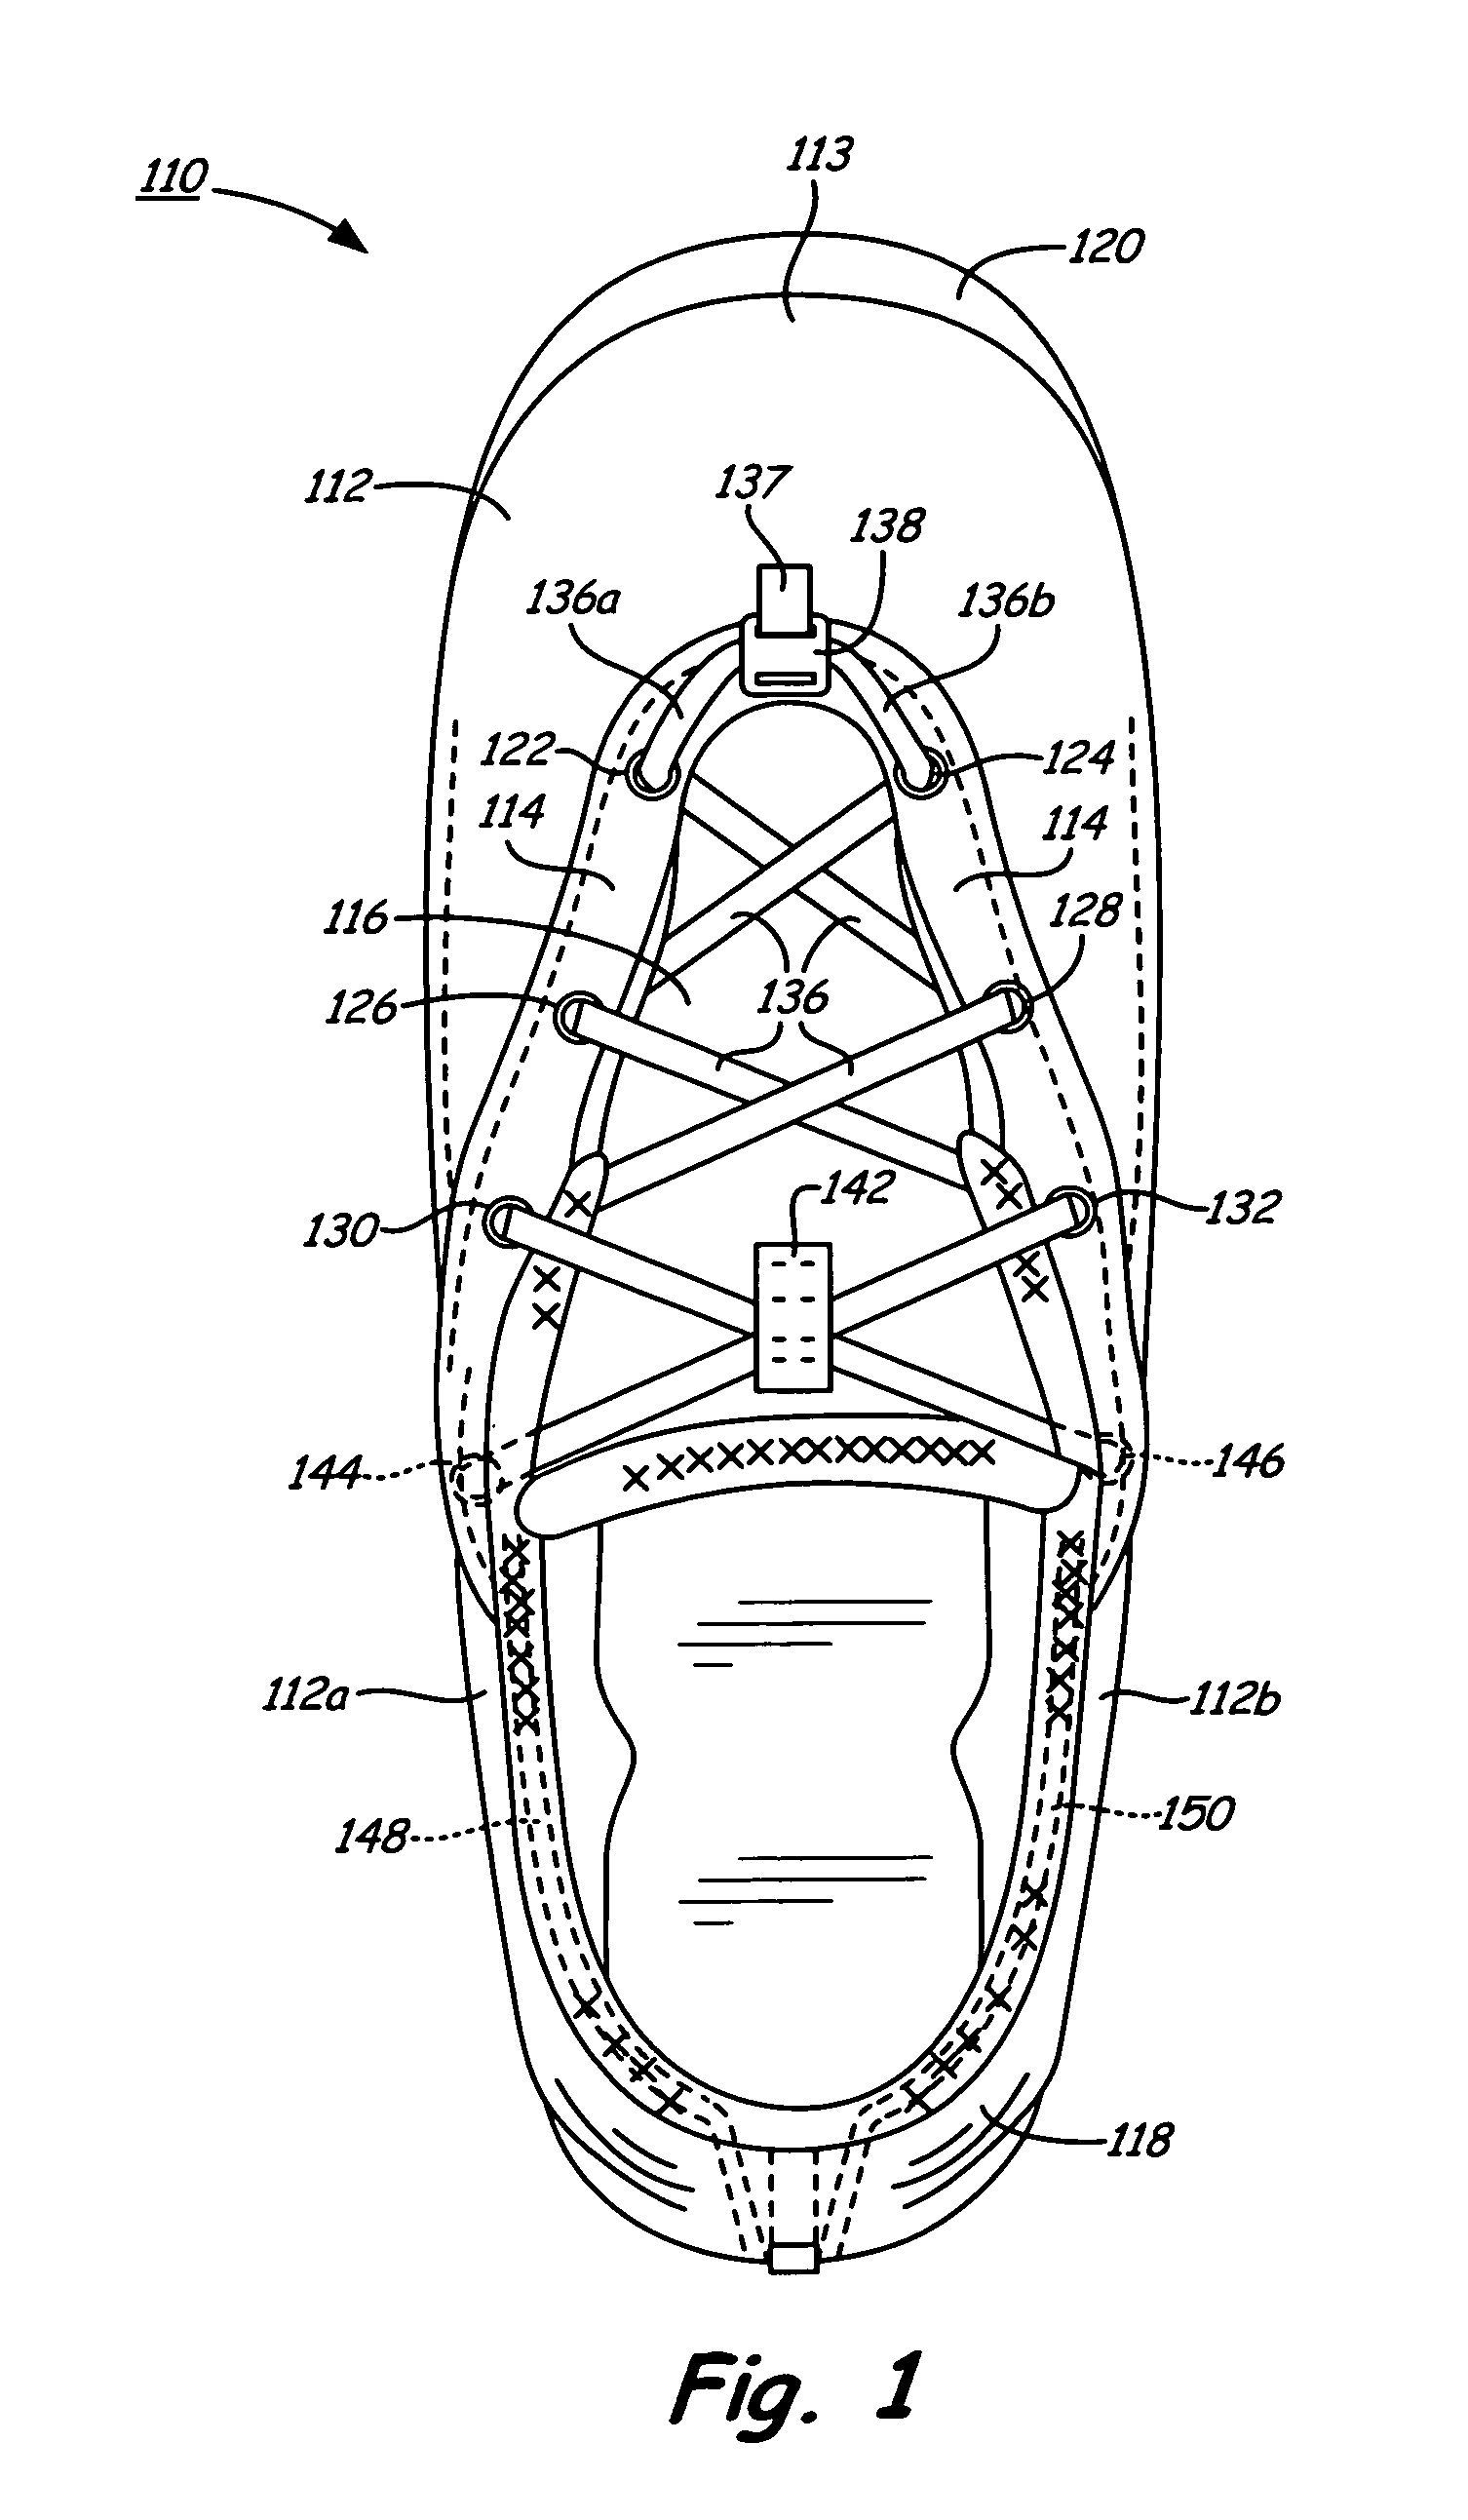 Automated tightening shoe